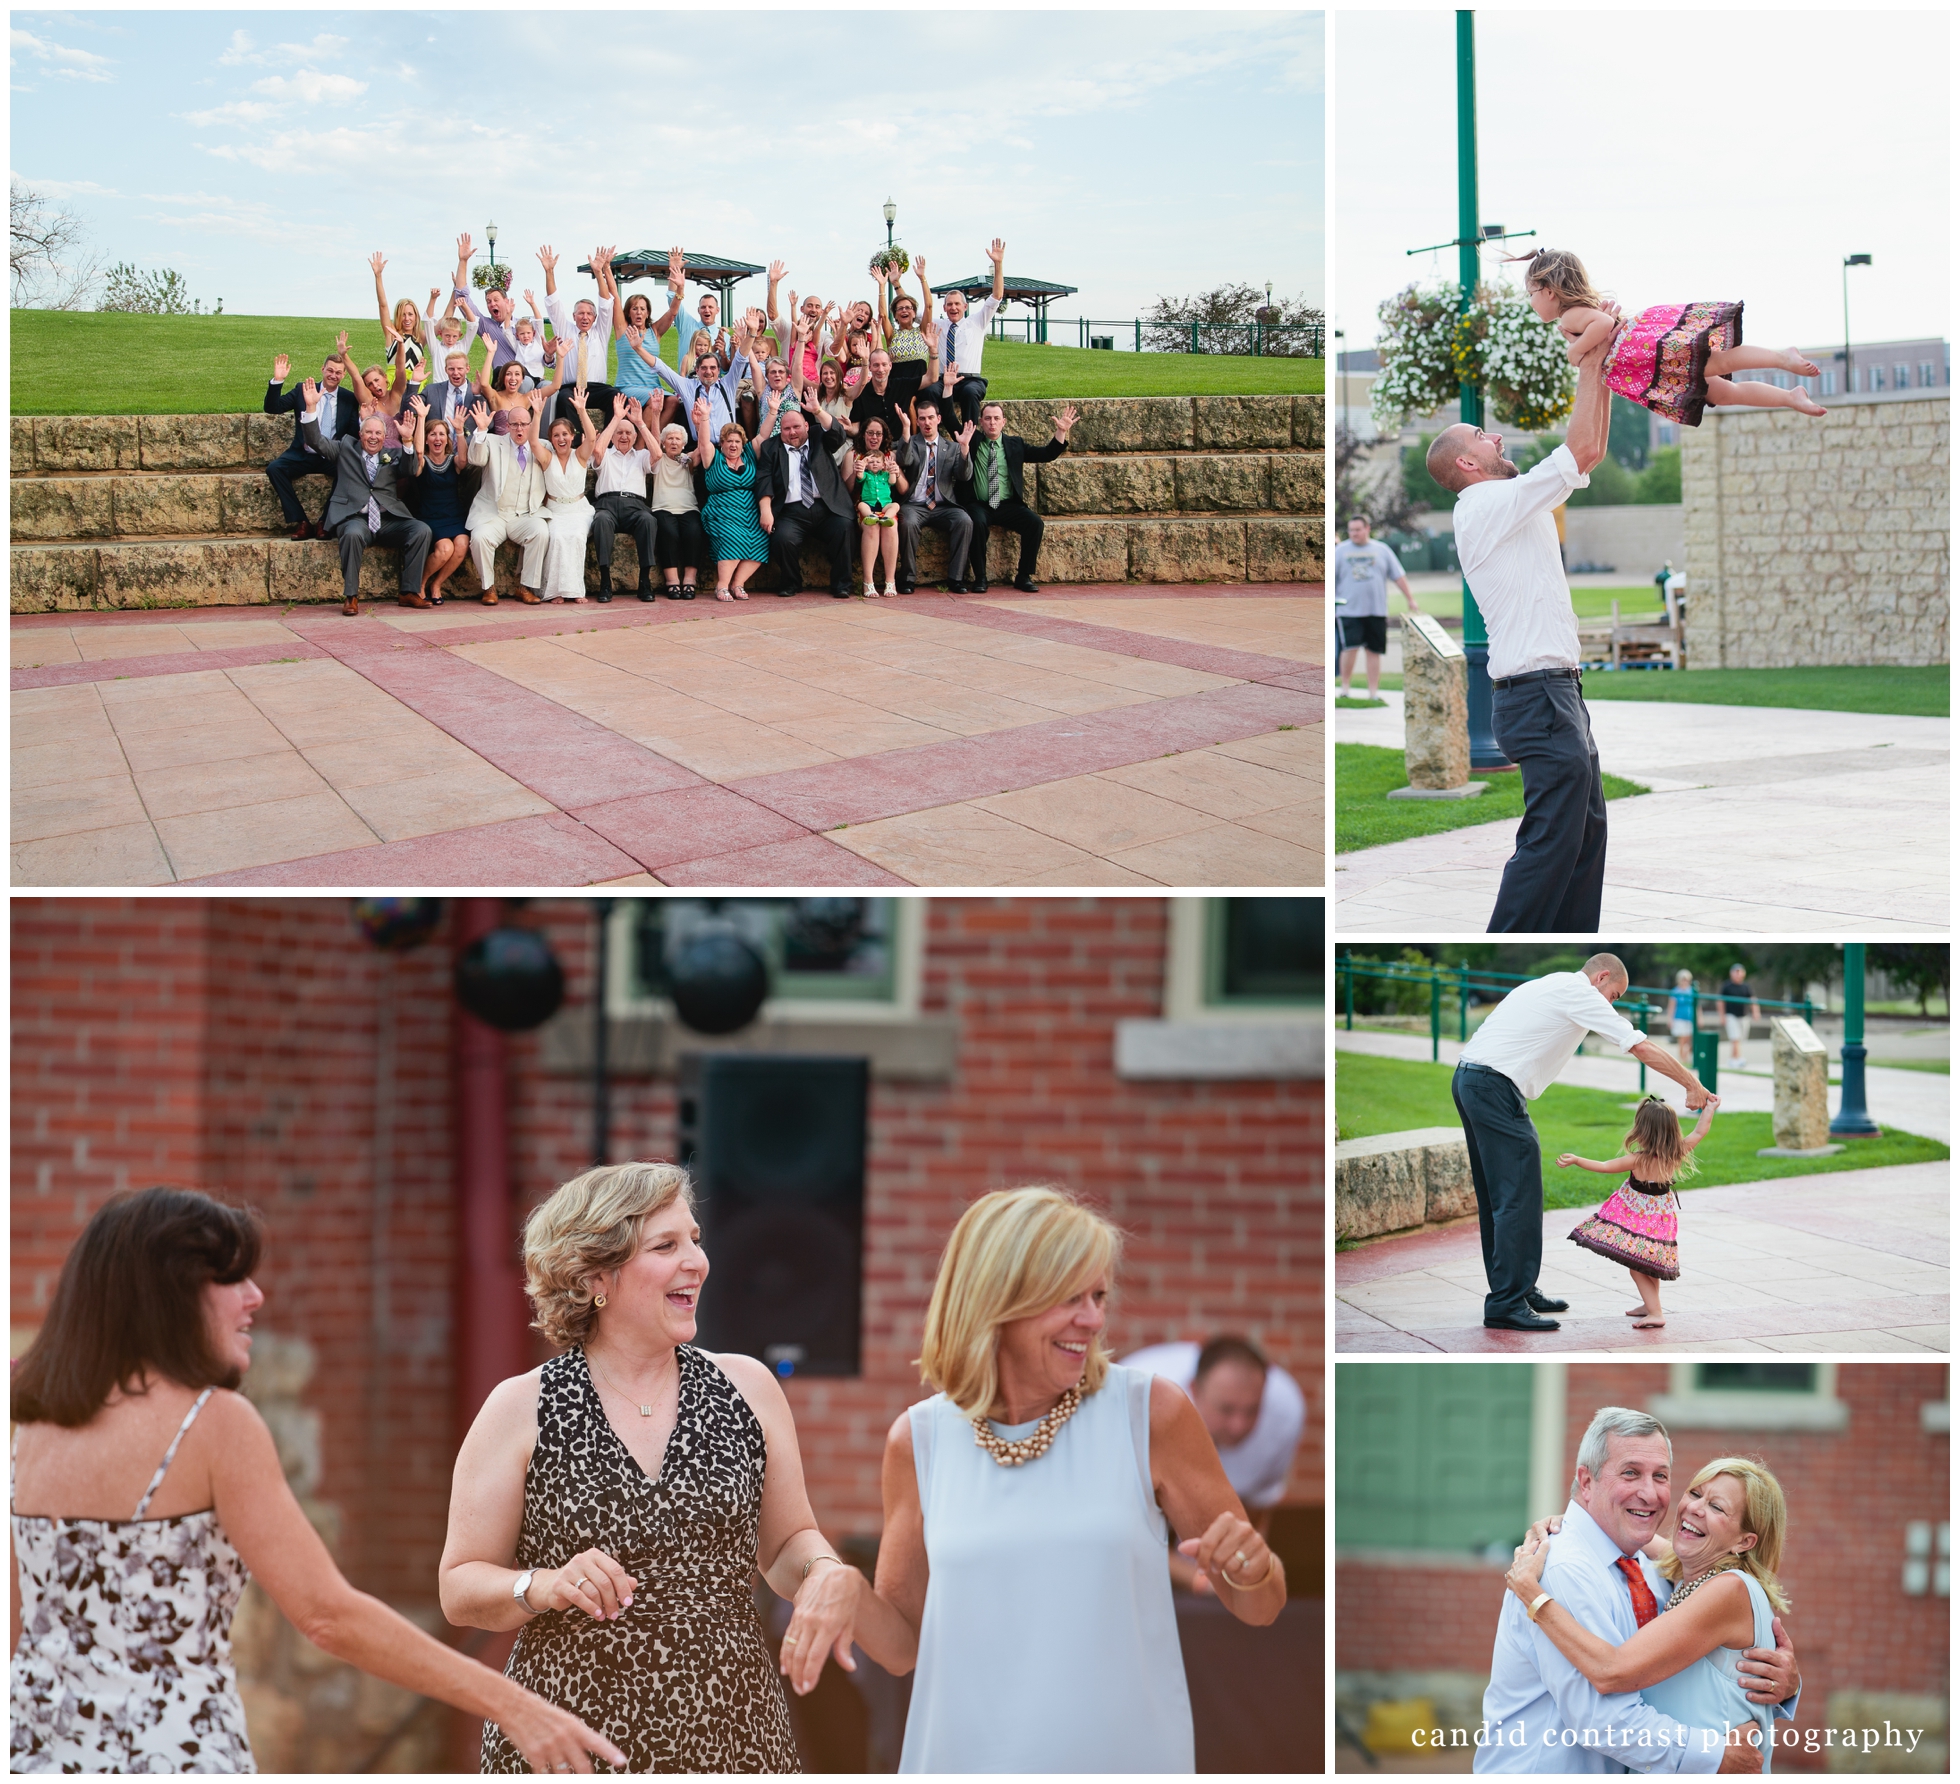 candid wedding photos at port of dubuque stone cliff winery wedding, candid contrast photography